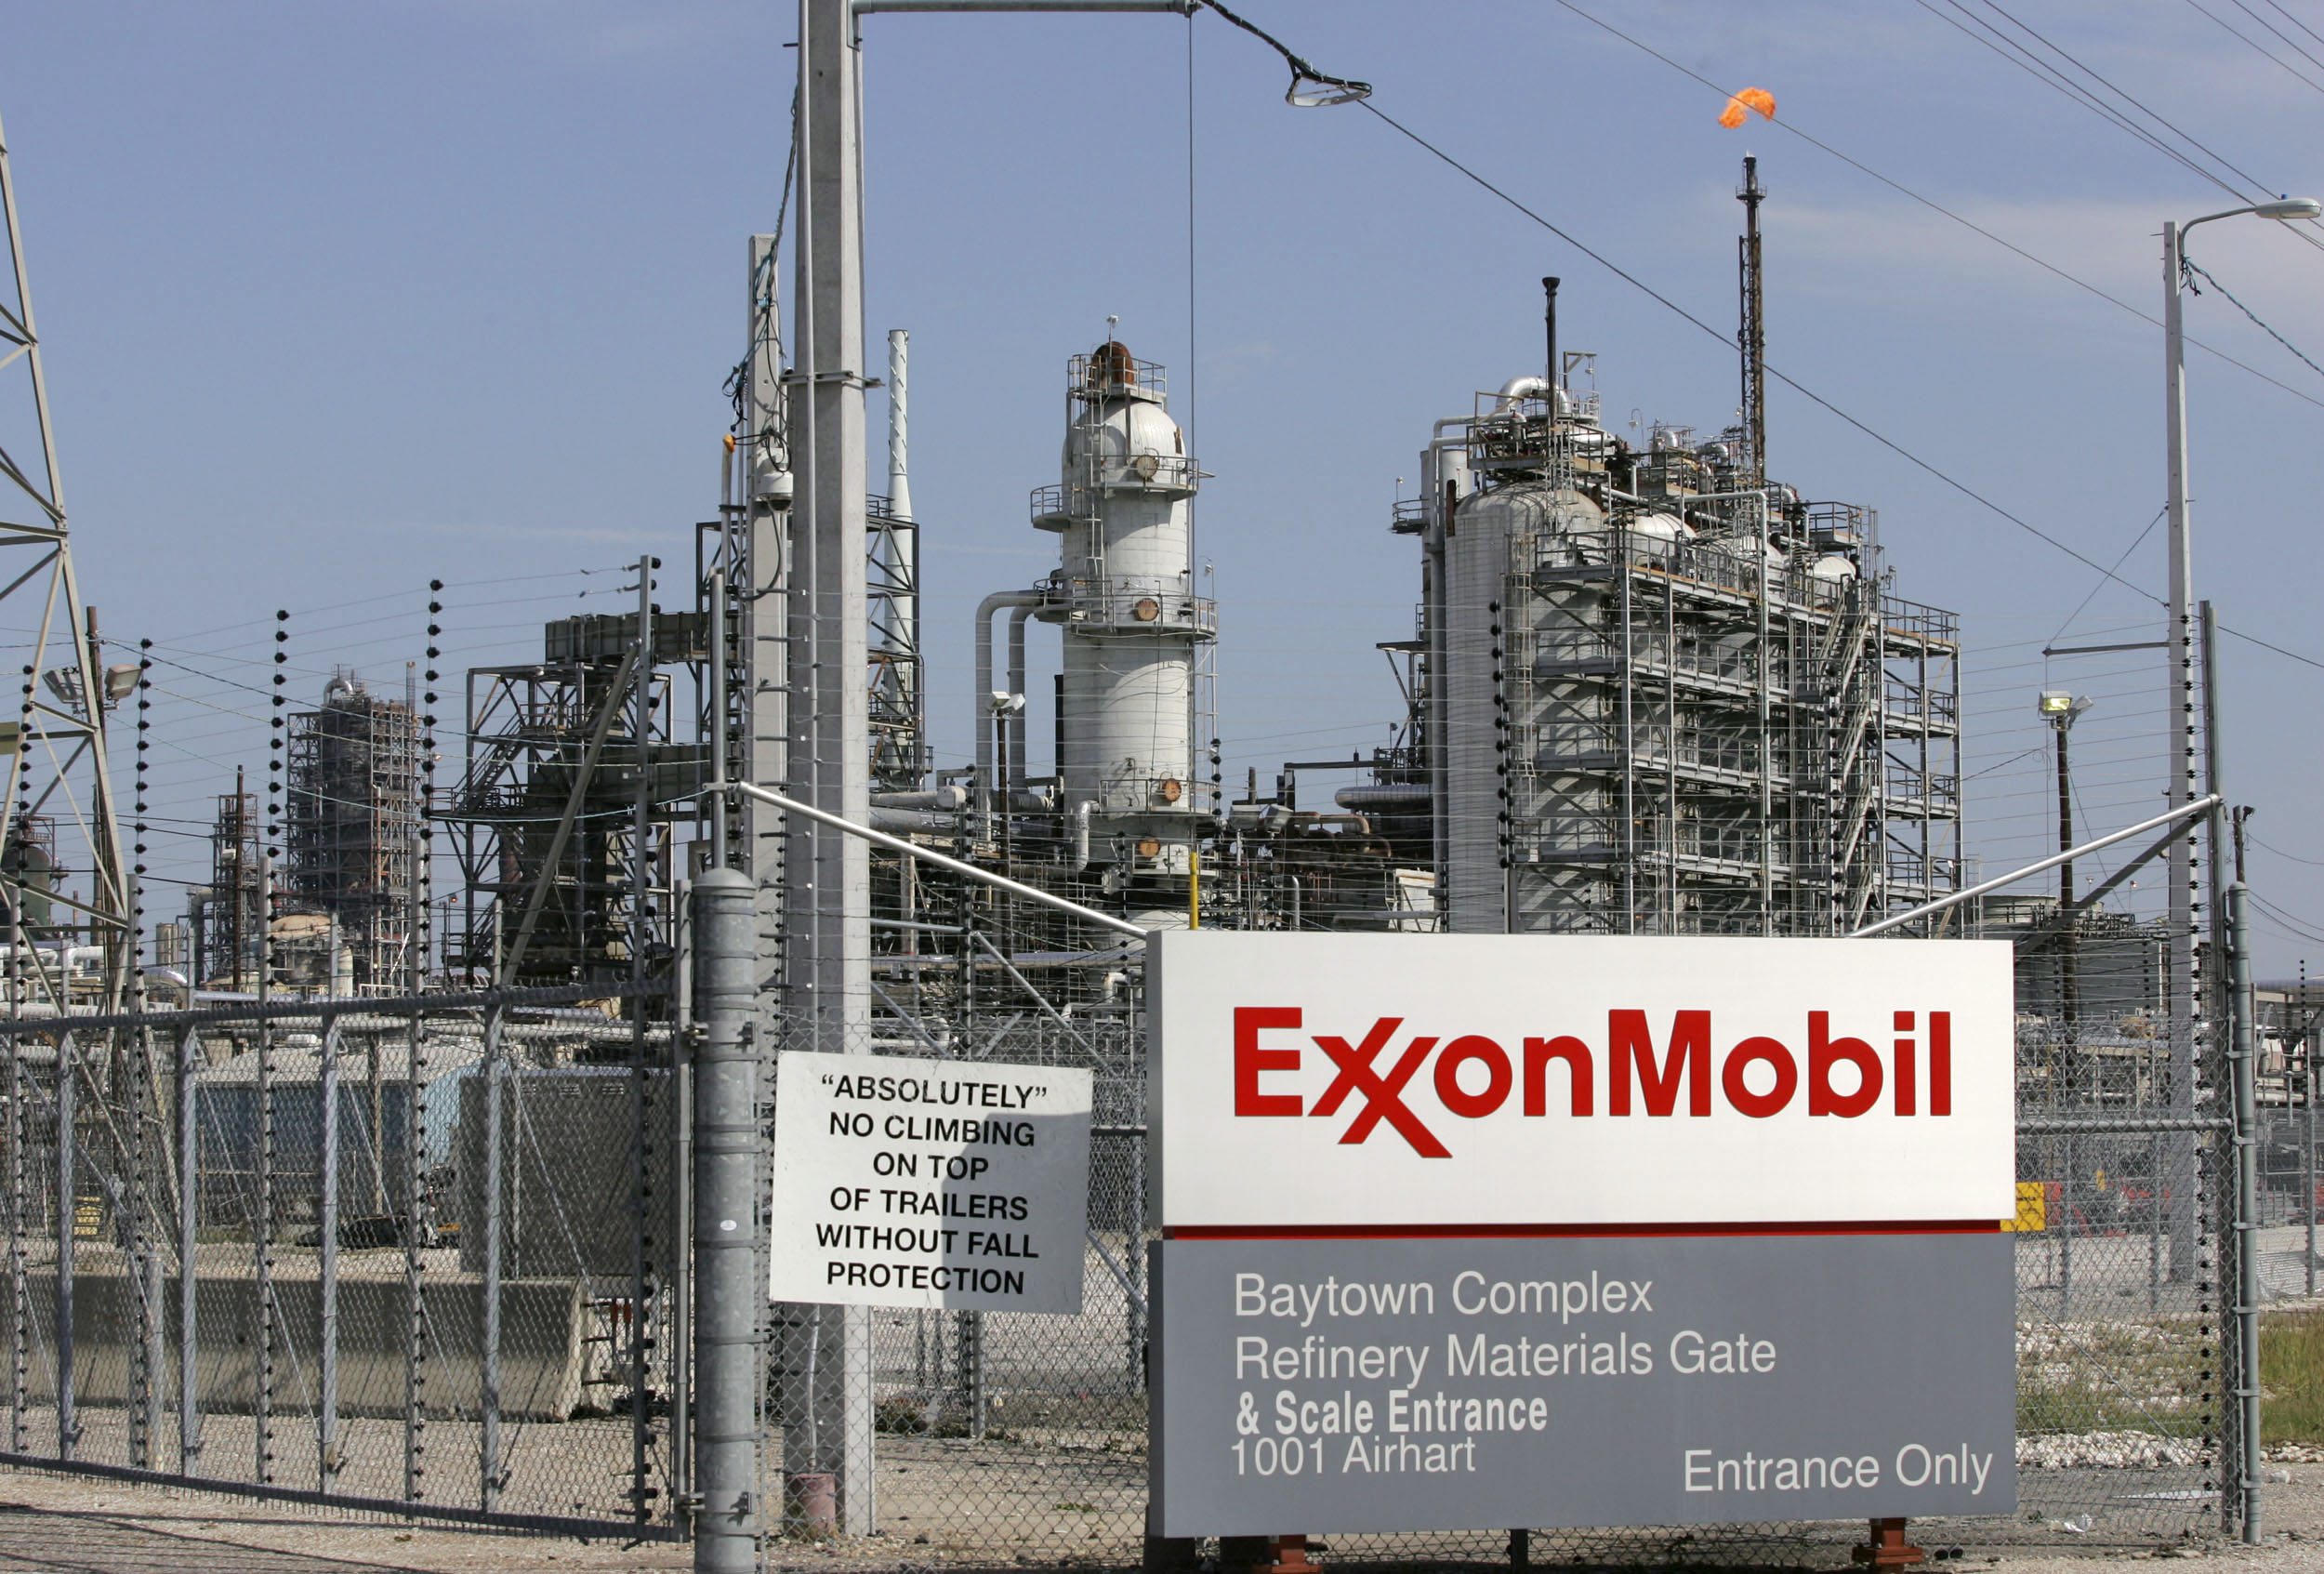 Unthwarted by Turkey, ExxonMobil to ply ahead with Cyprus oil, gas exploration